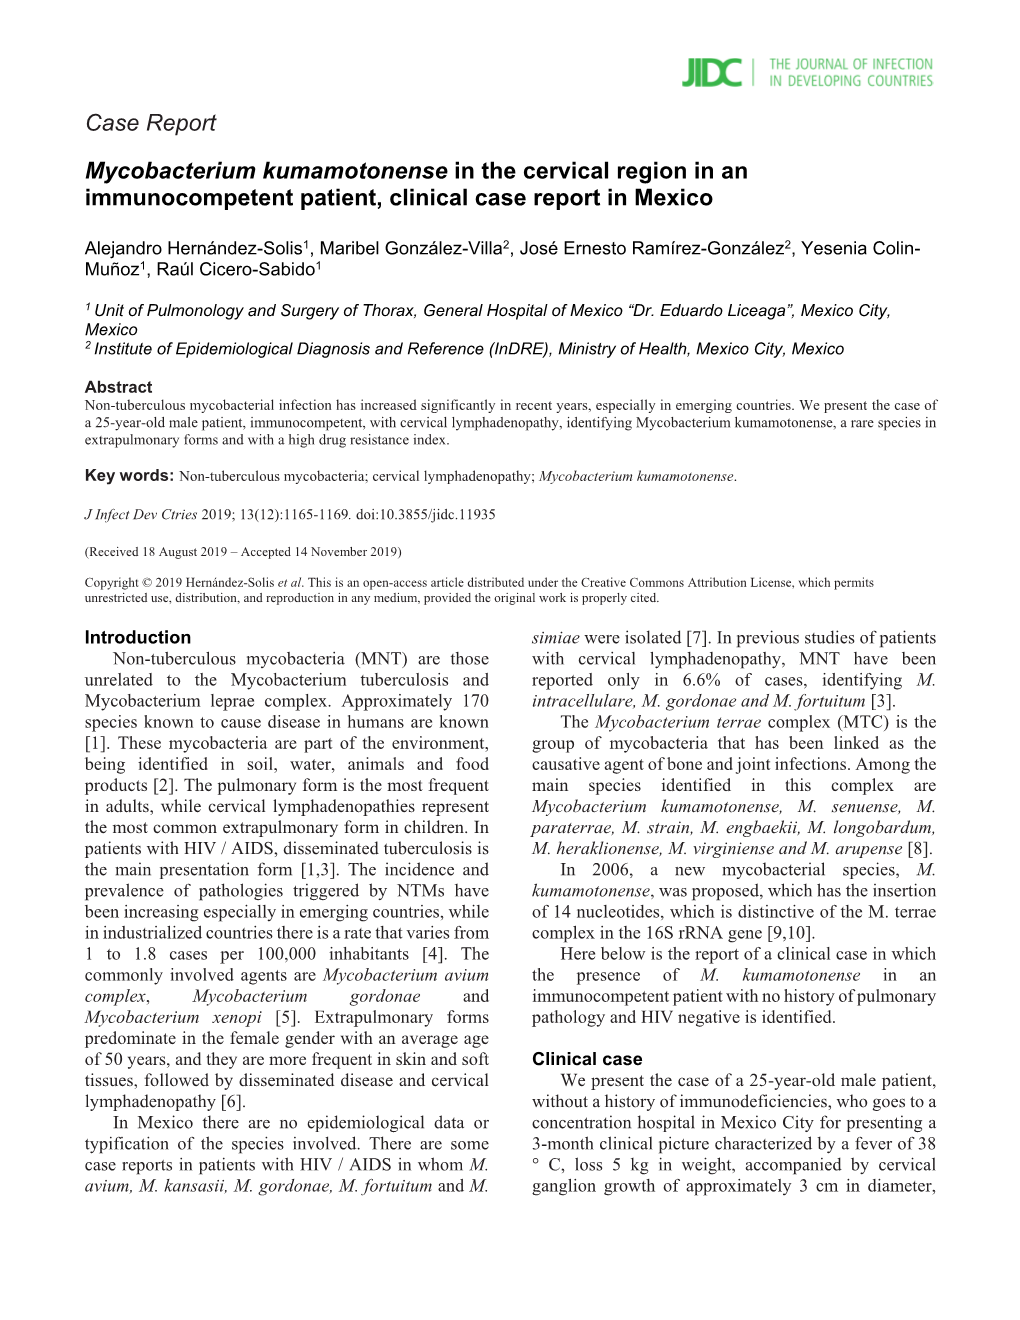 Case Report Mycobacterium Kumamotonense in the Cervical Region in an Immunocompetent Patient, Clinical Case Report in Mexico